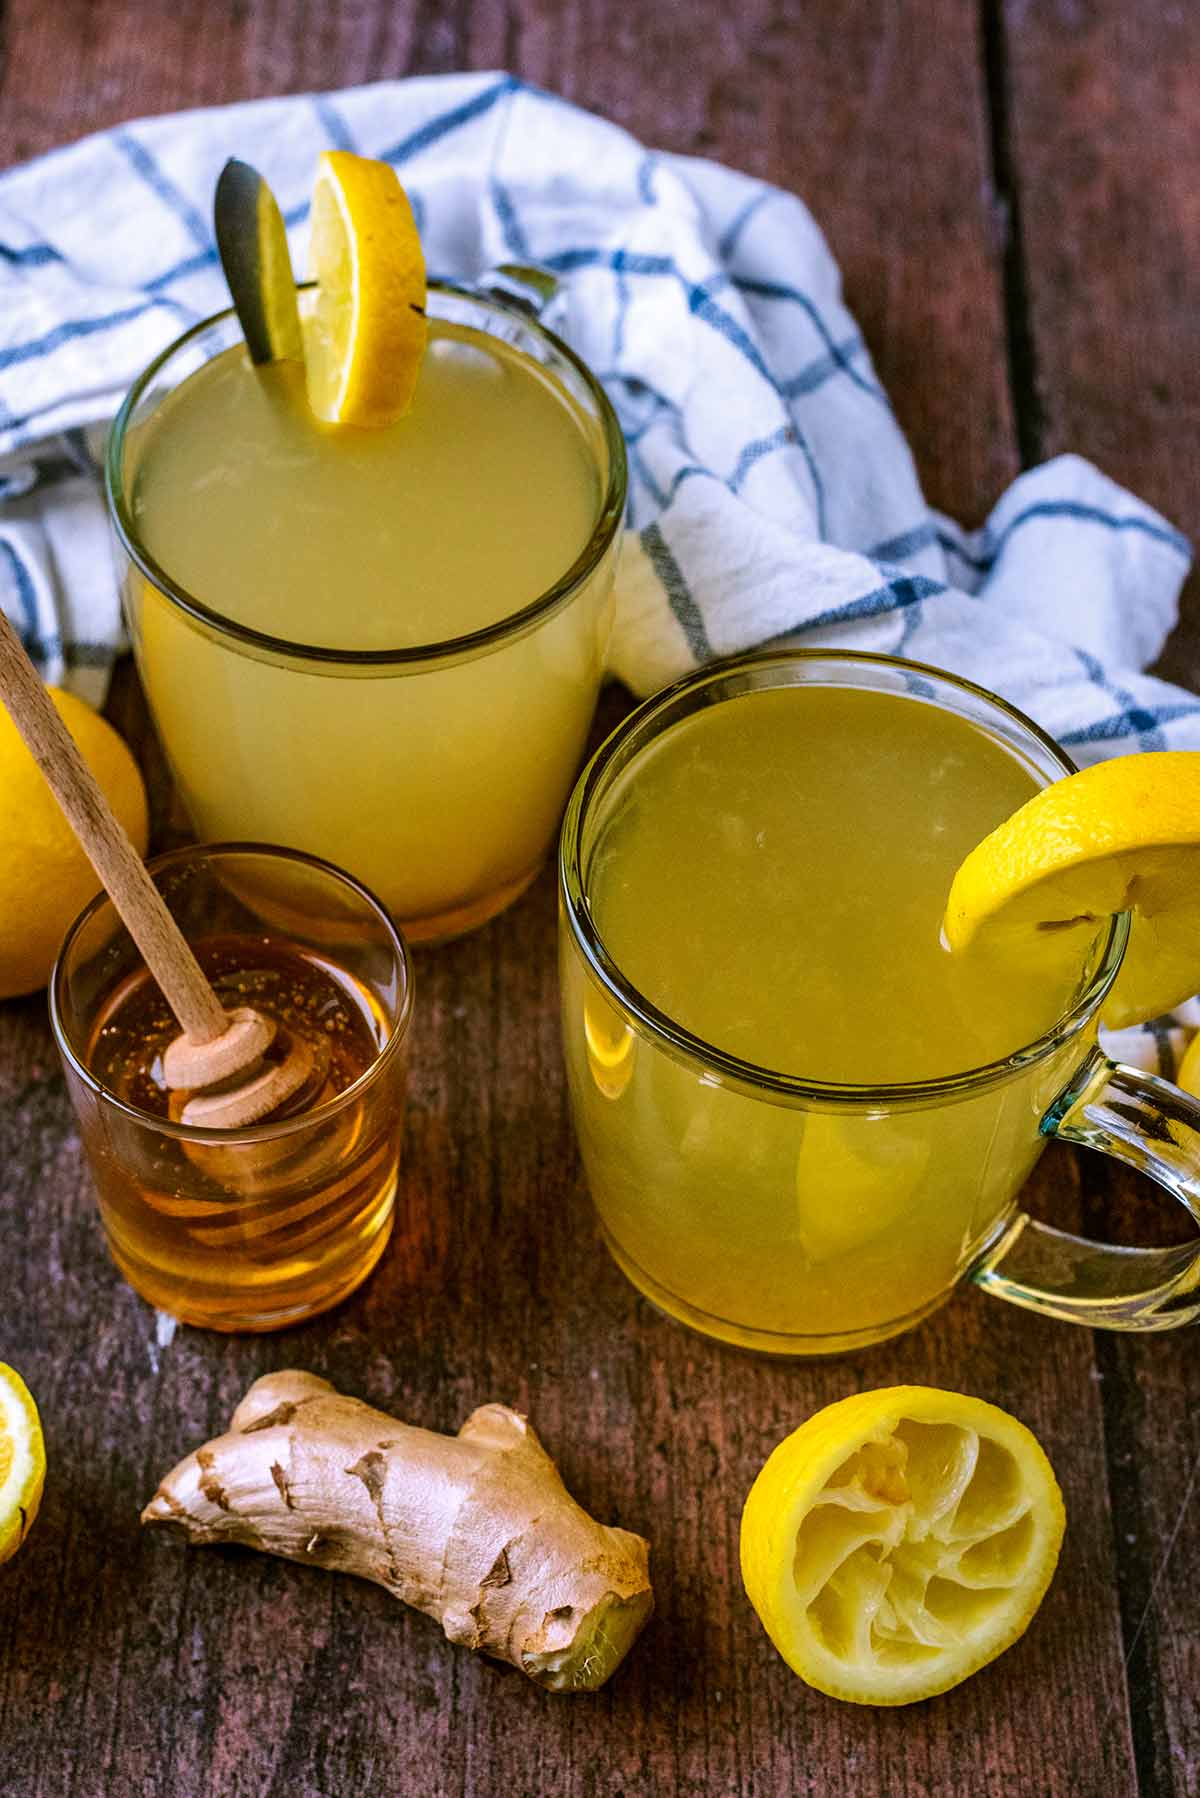 Two glasses of hot lemon drink next to a pot of honey, some ginger and a lemon half.